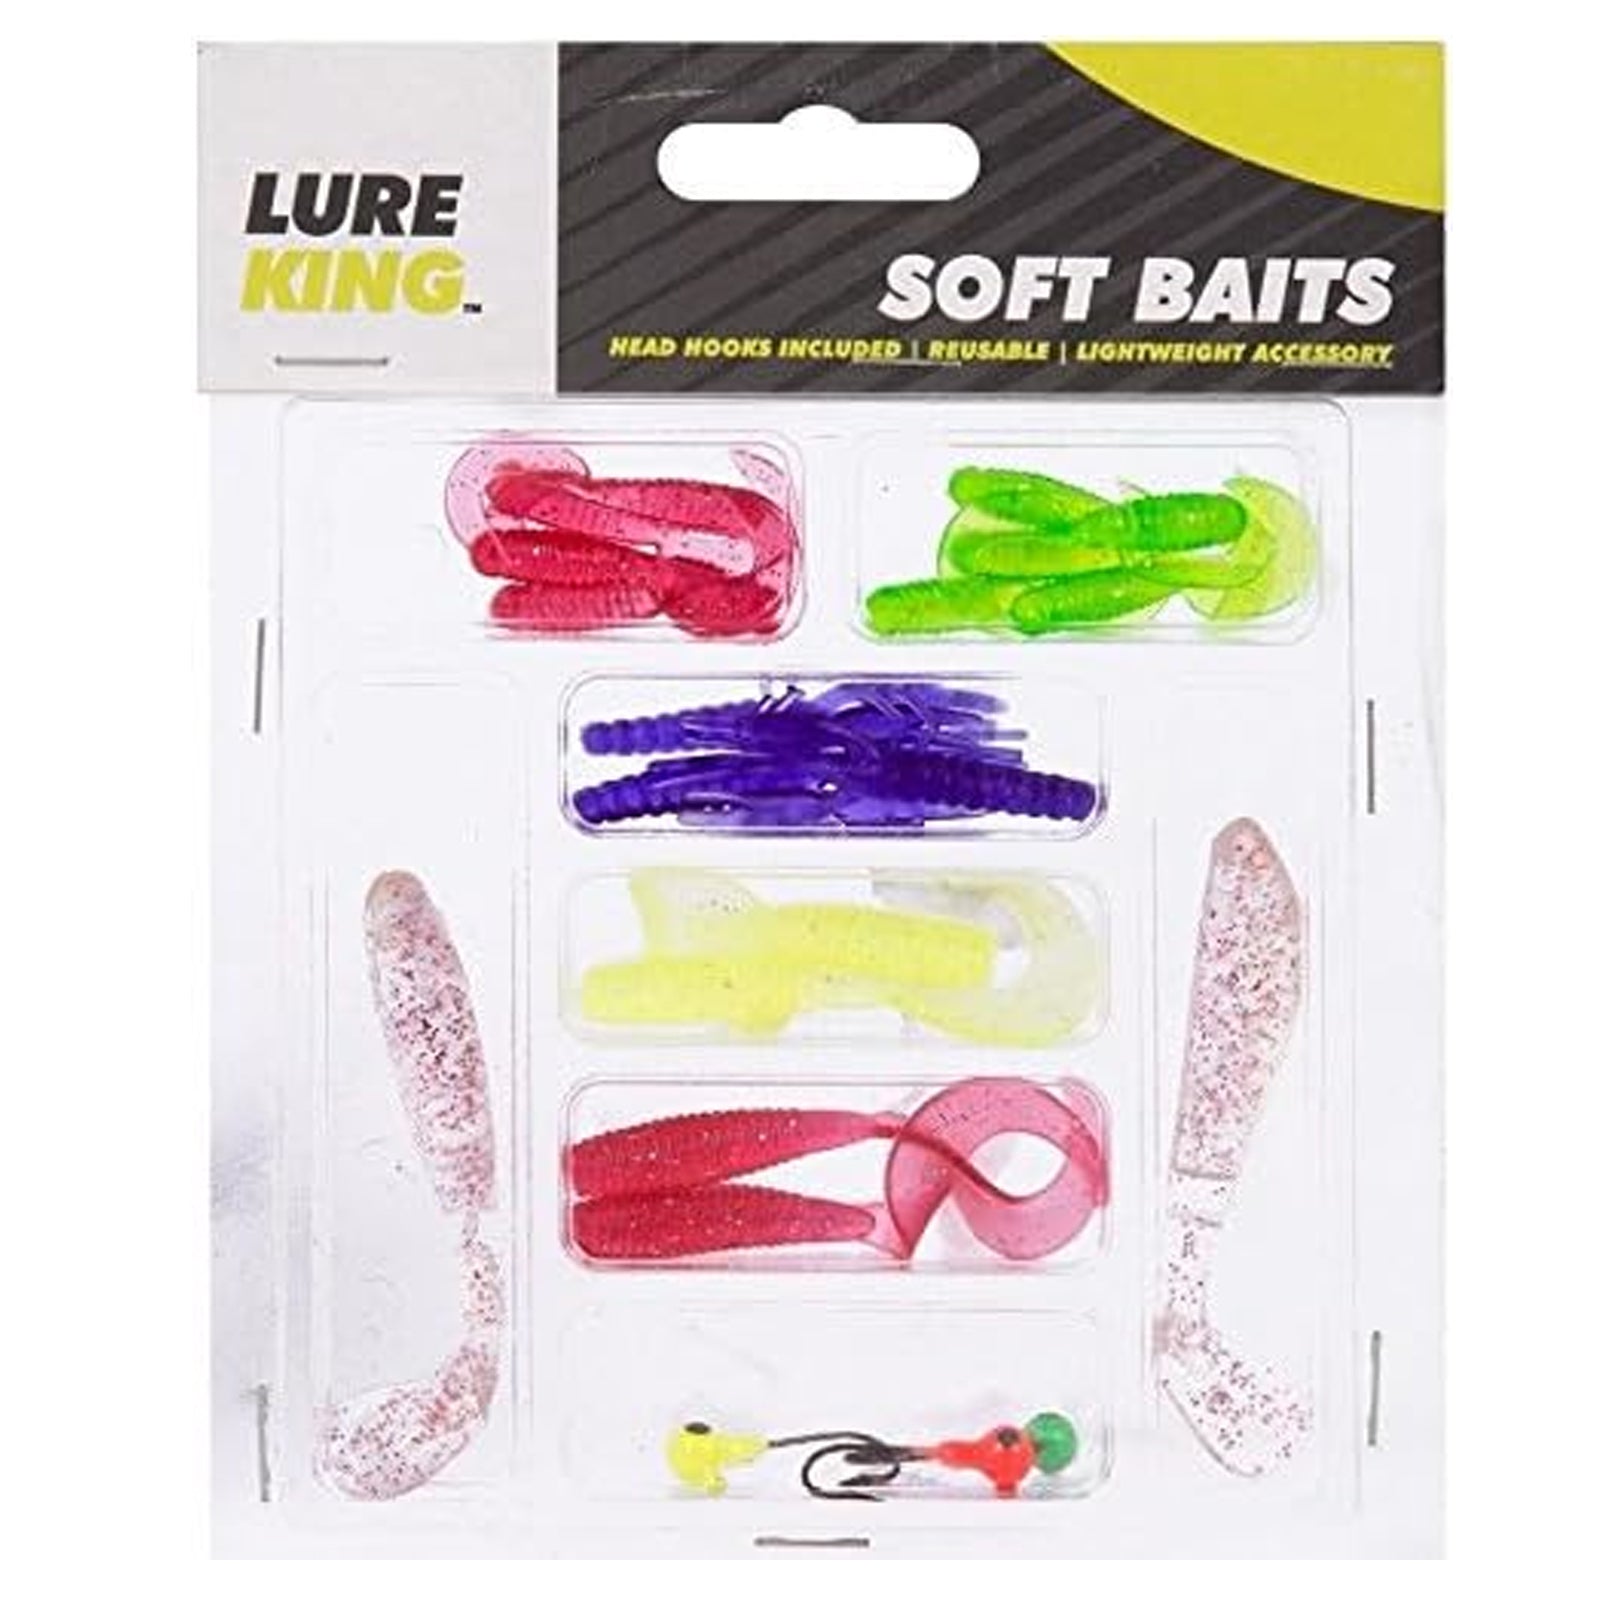 Lure King 22pc Soft Baits Set Fishing Tackle Head Hooks Lures Vibrant Coloured Jig Worms